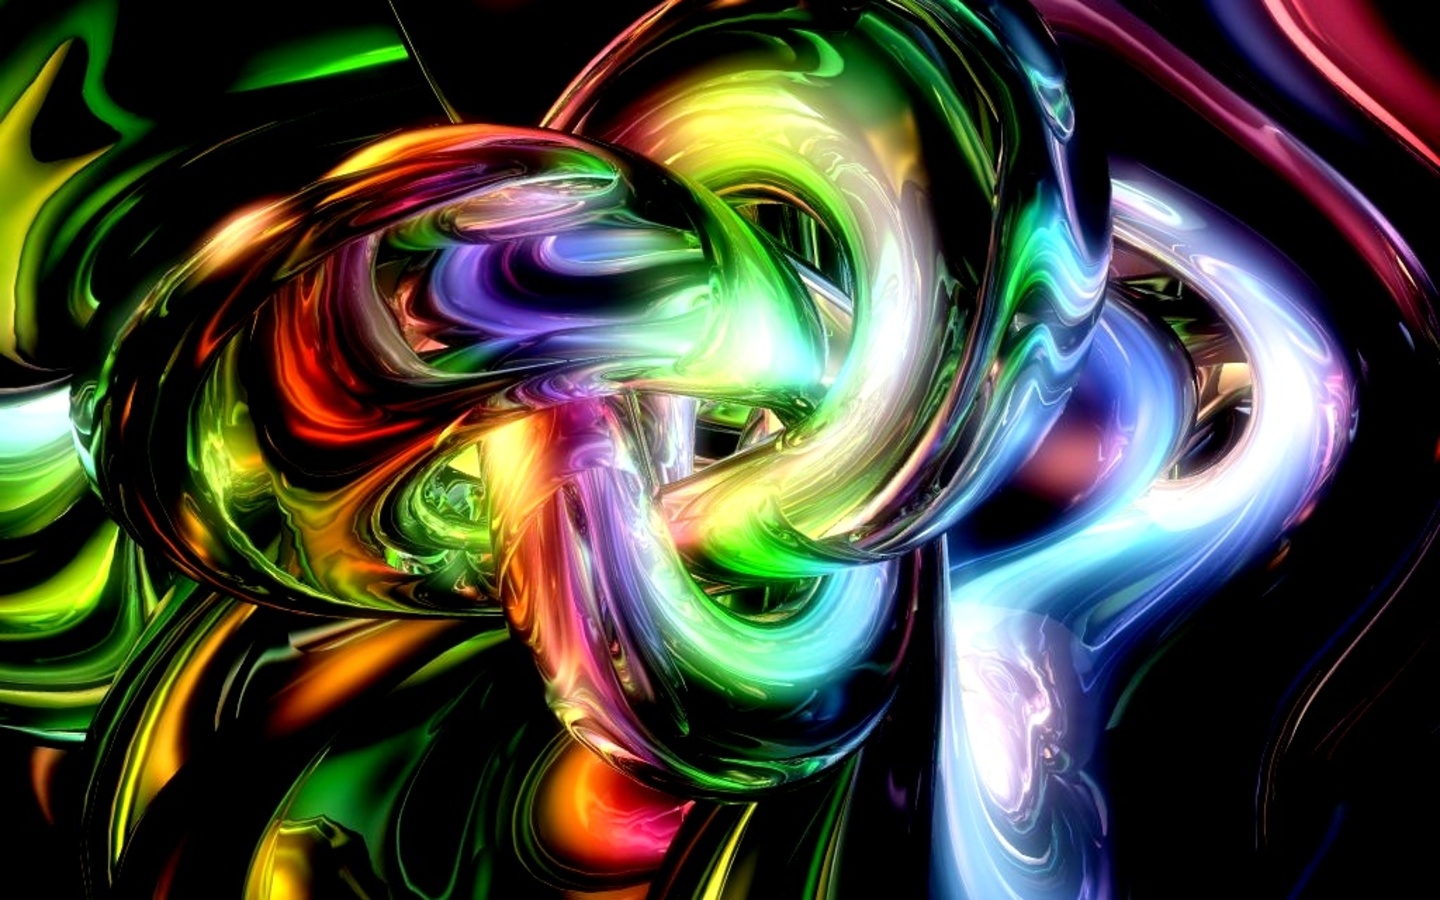 Neon Wallpapers Android Apps On Google Play - Cool Screensavers - 1440x900  Wallpaper 